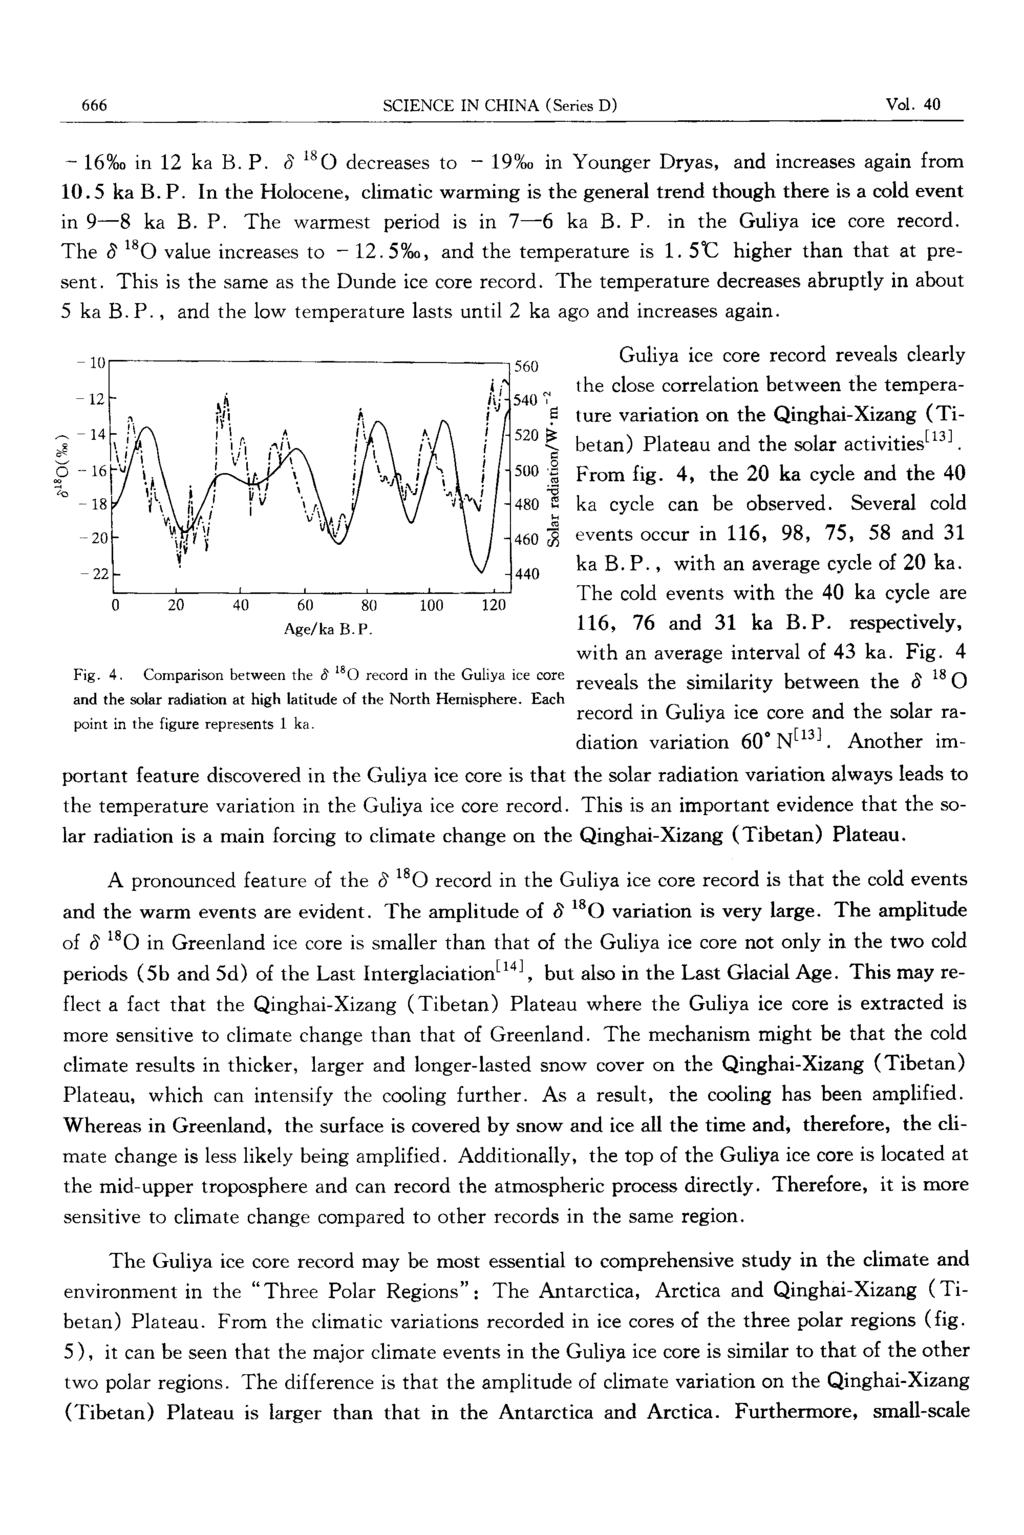 666 SCIENCE IN CHINA (Series D) Vol. 40 - l6%0 in 12 ka B. P. 6 '"1 decreases to - 19%, in Younger Dryas, and increases again from 10.5 ka B. P. In the Holocene, climatic warming is the general trend though there is a cold event in 9-8 ka B.